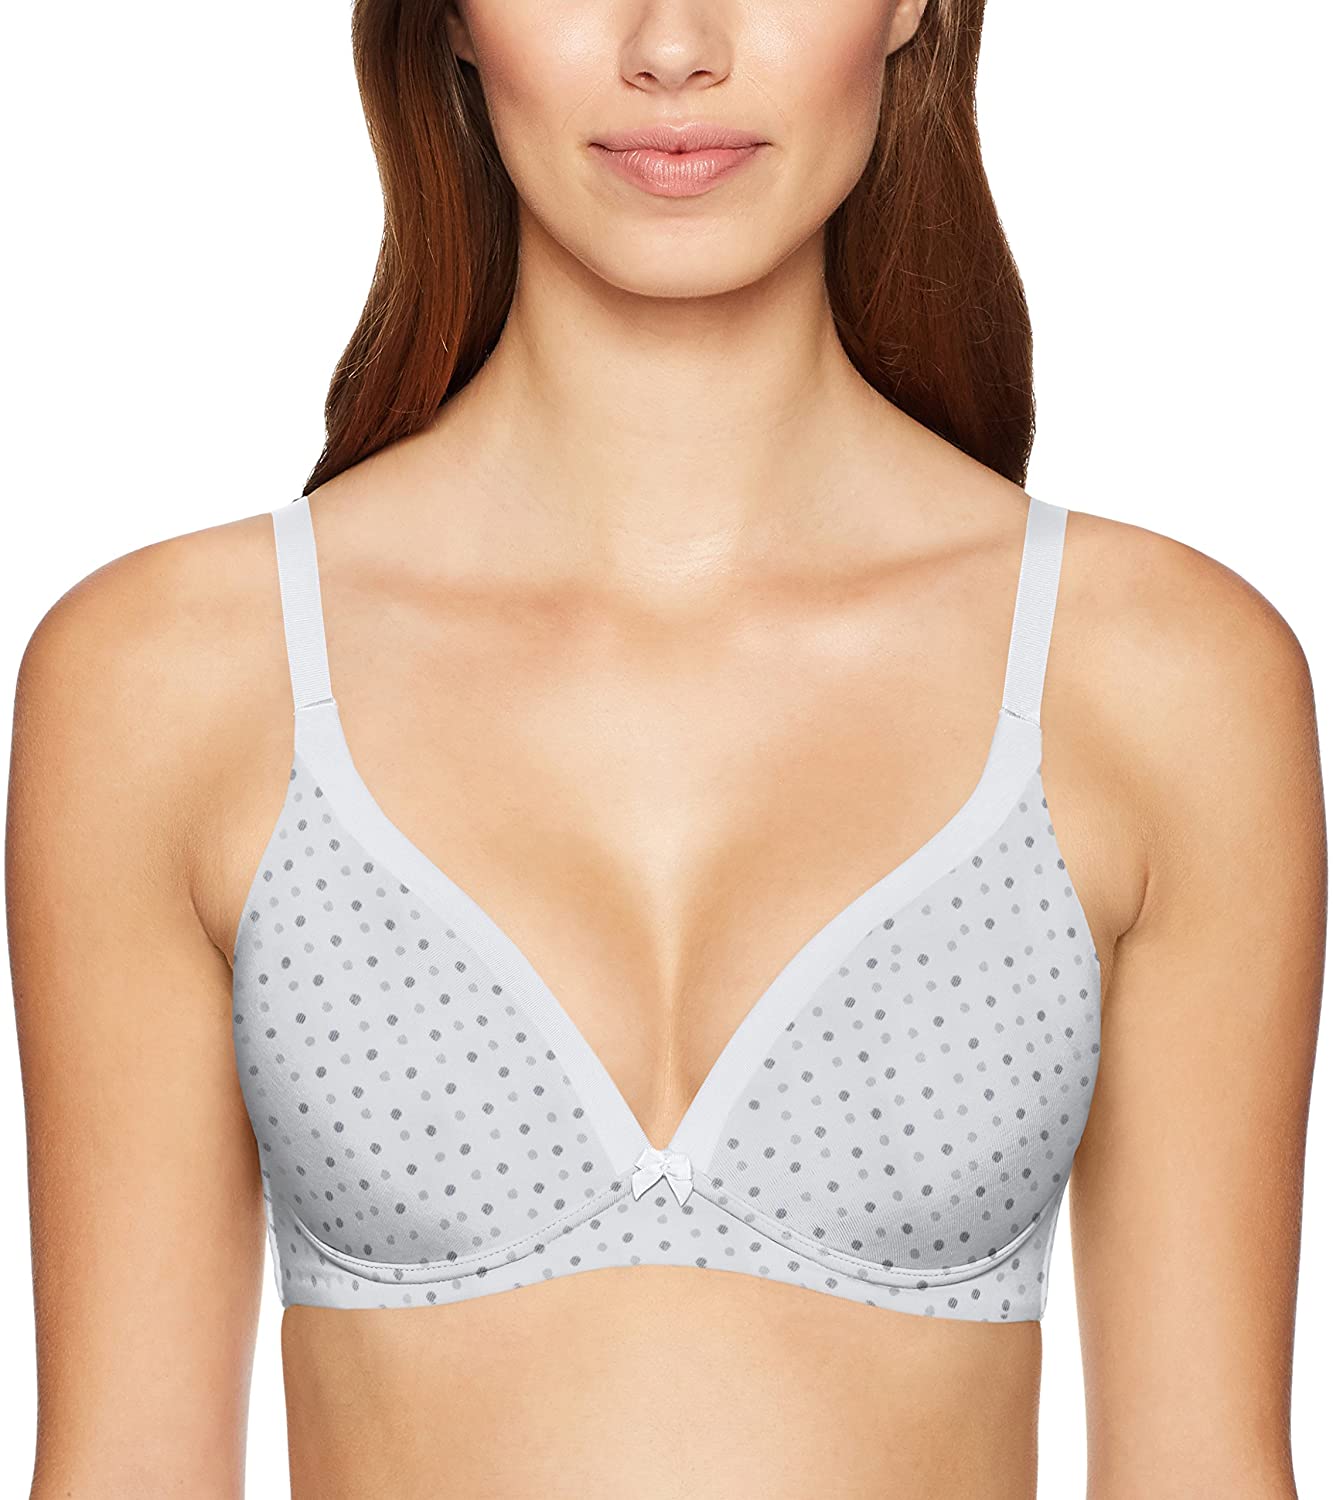 Warner's Invisible Bliss Cotton Wirefree with Lift Bra